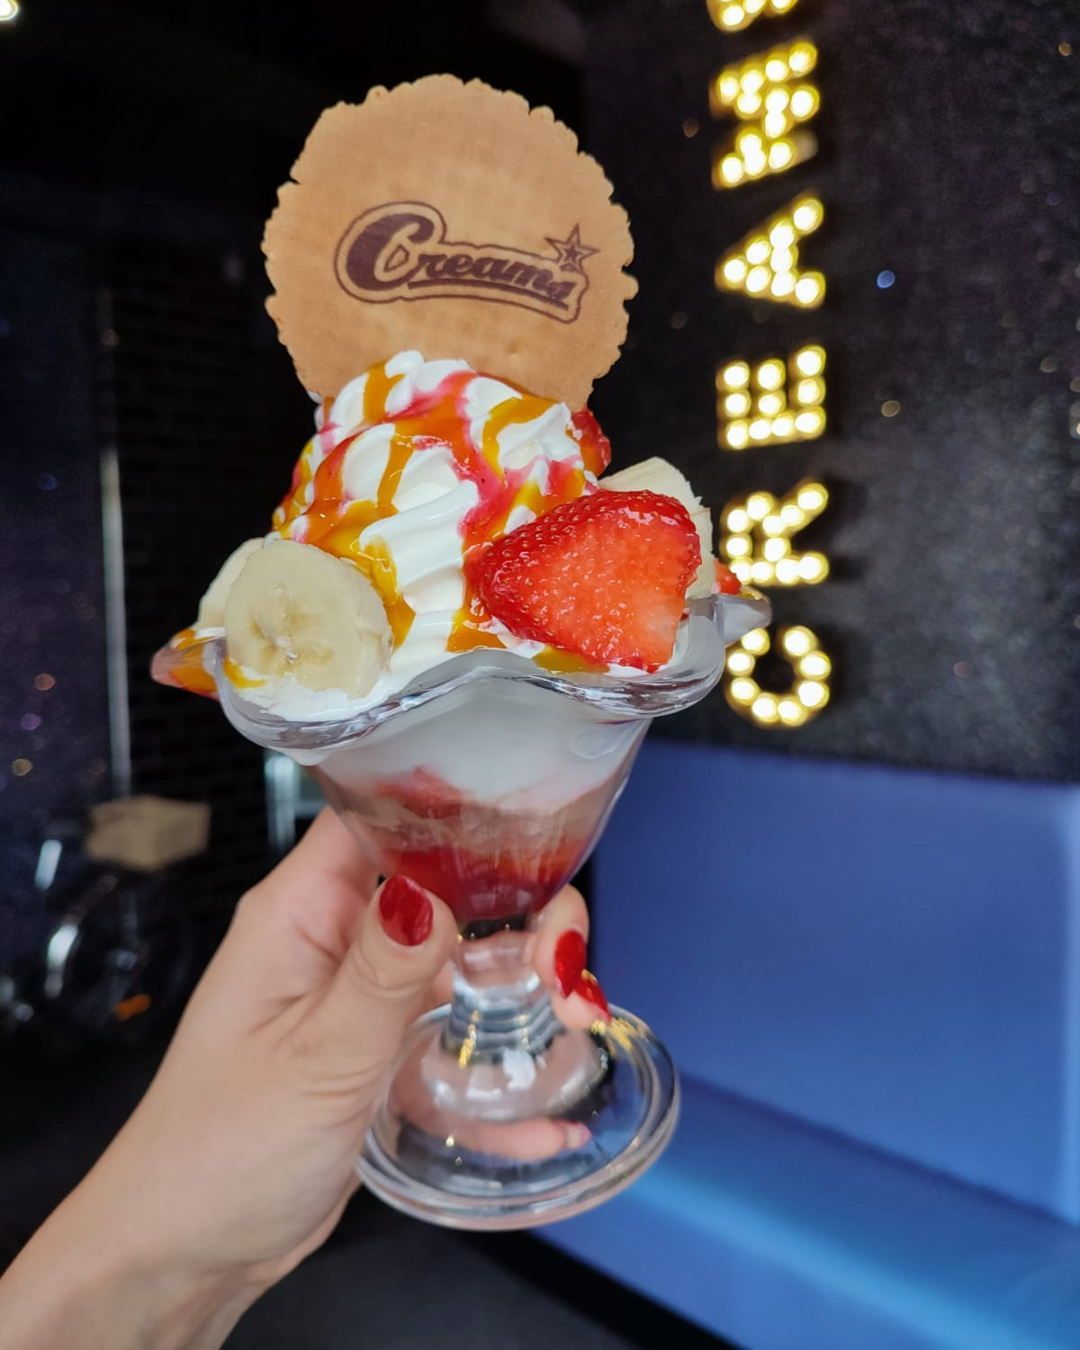 Dessert cafe Creams is opening a huge new site at Manchester Arndale, The Manc